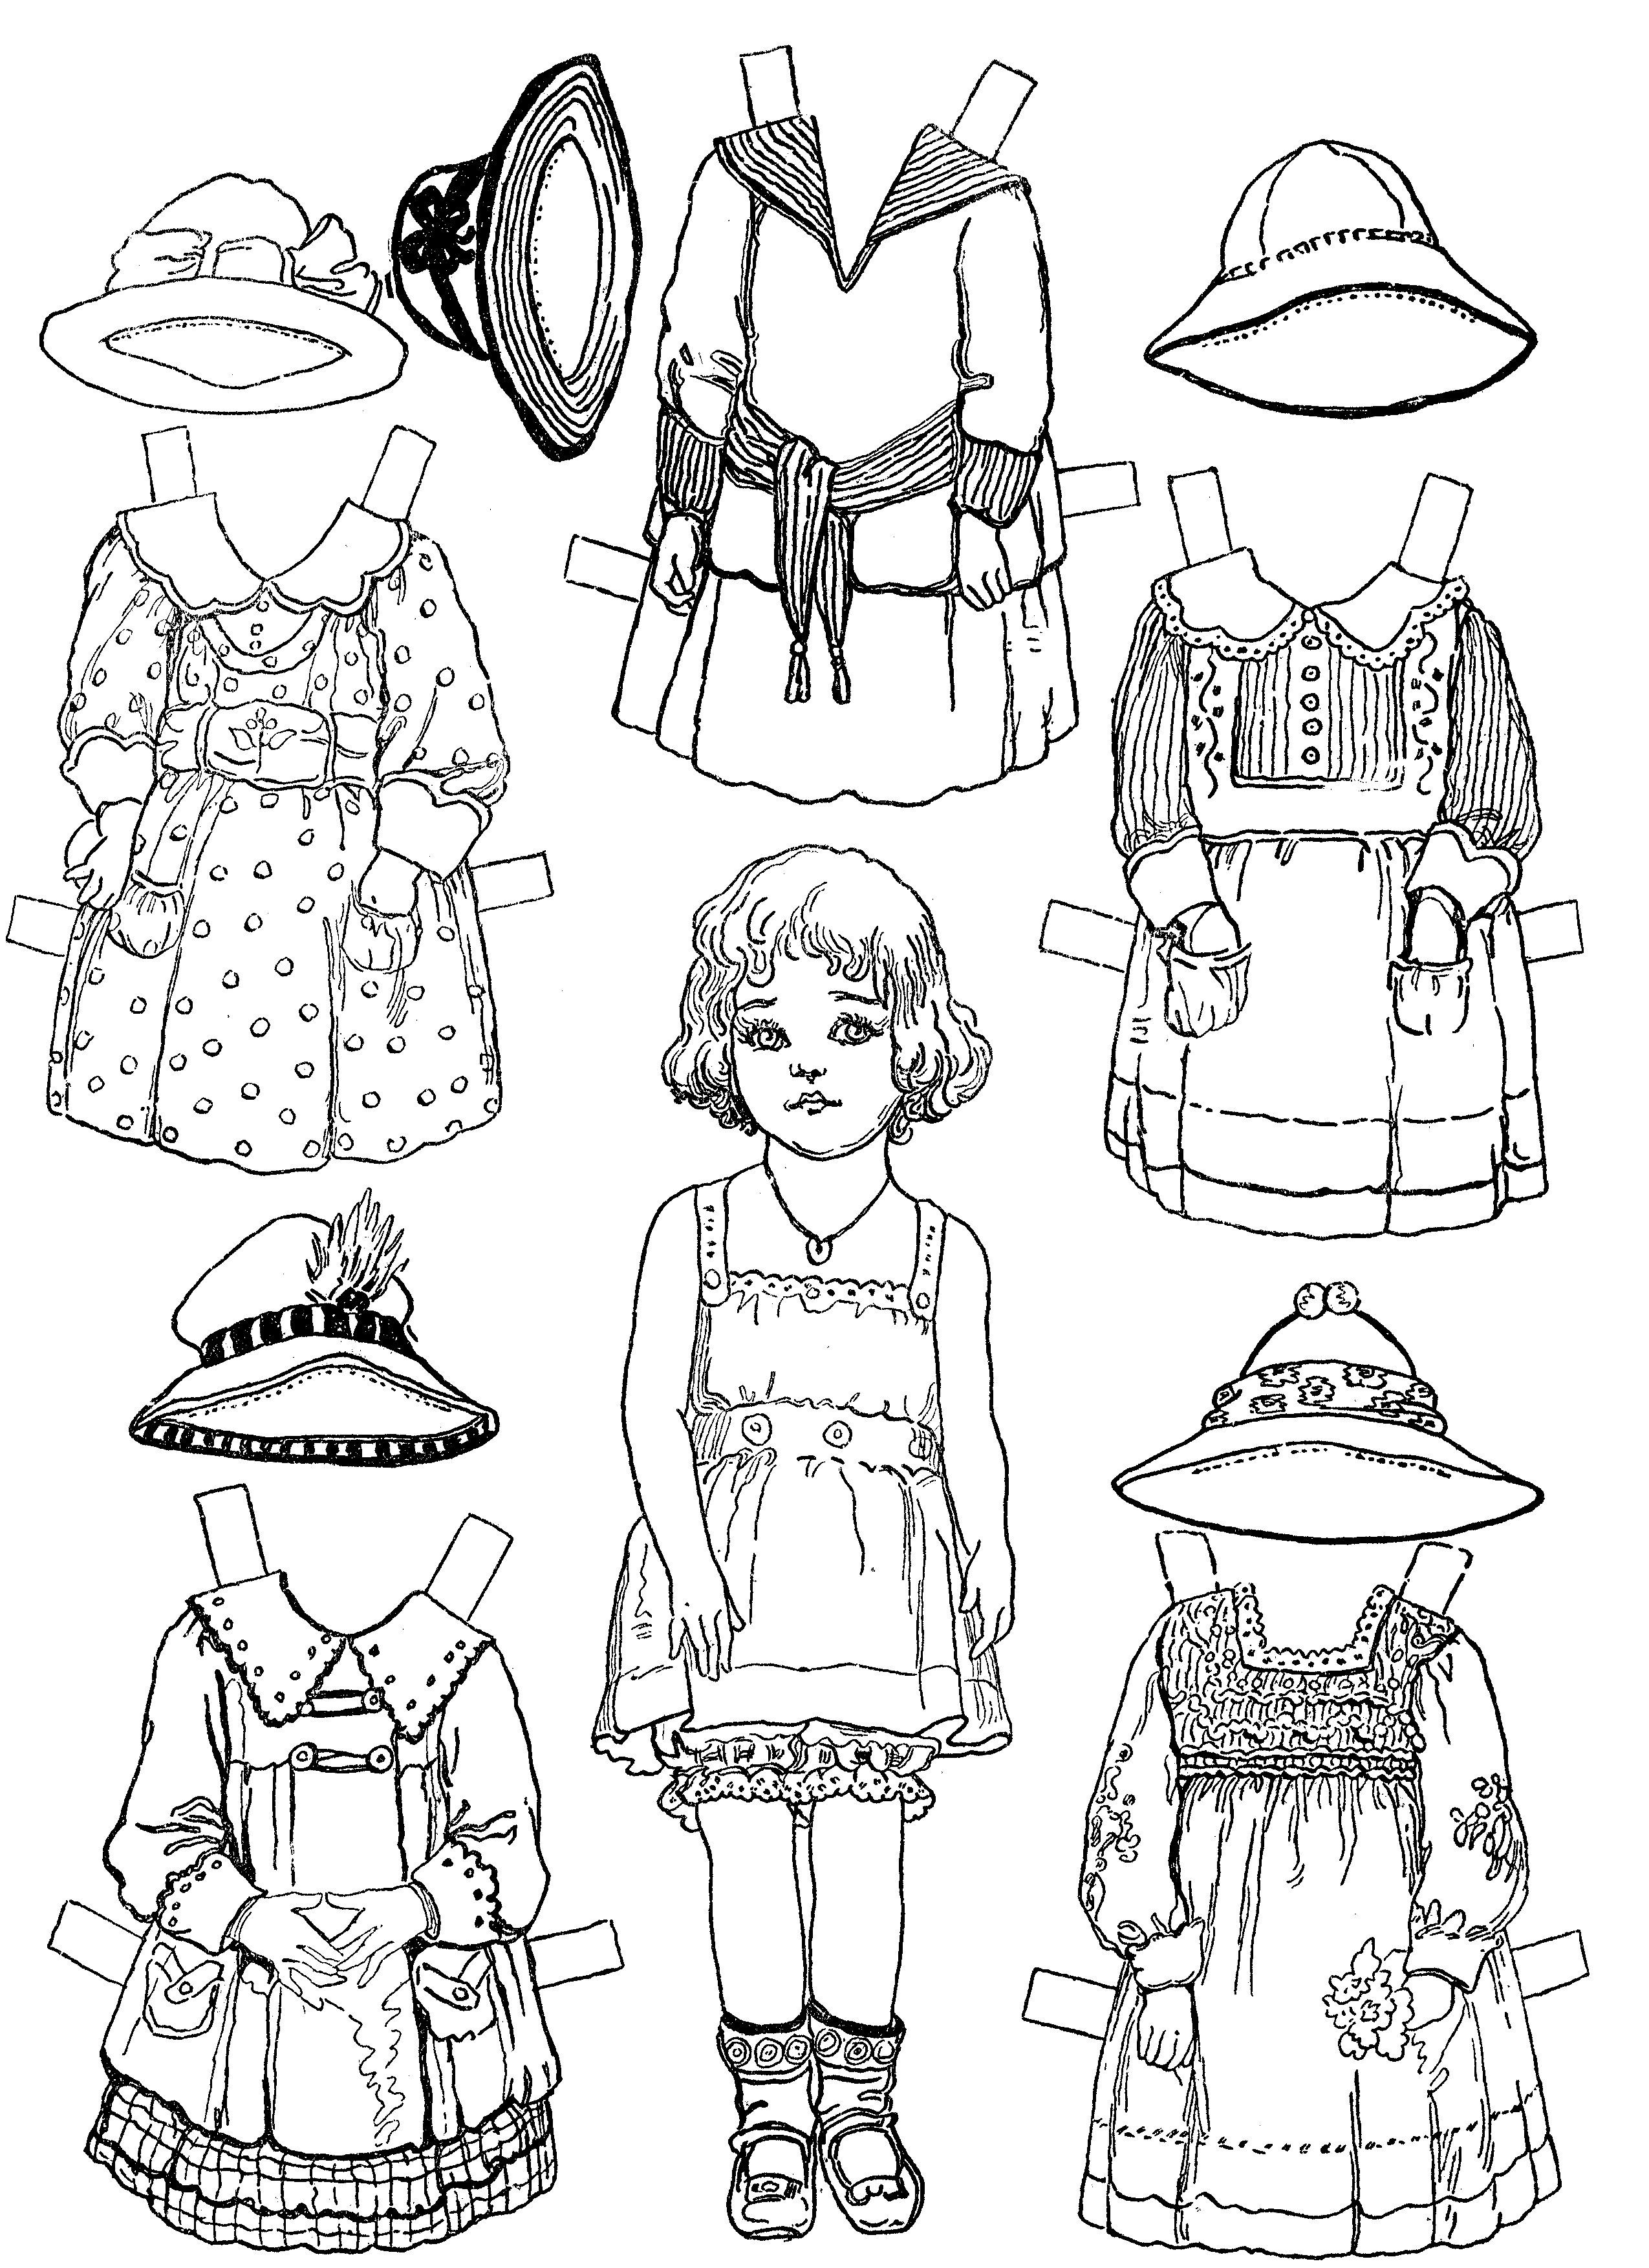 Paper Dolls And Paper Doll Dresses – Printable From Kid Fun | Color - Free Printable Paper Doll Coloring Pages